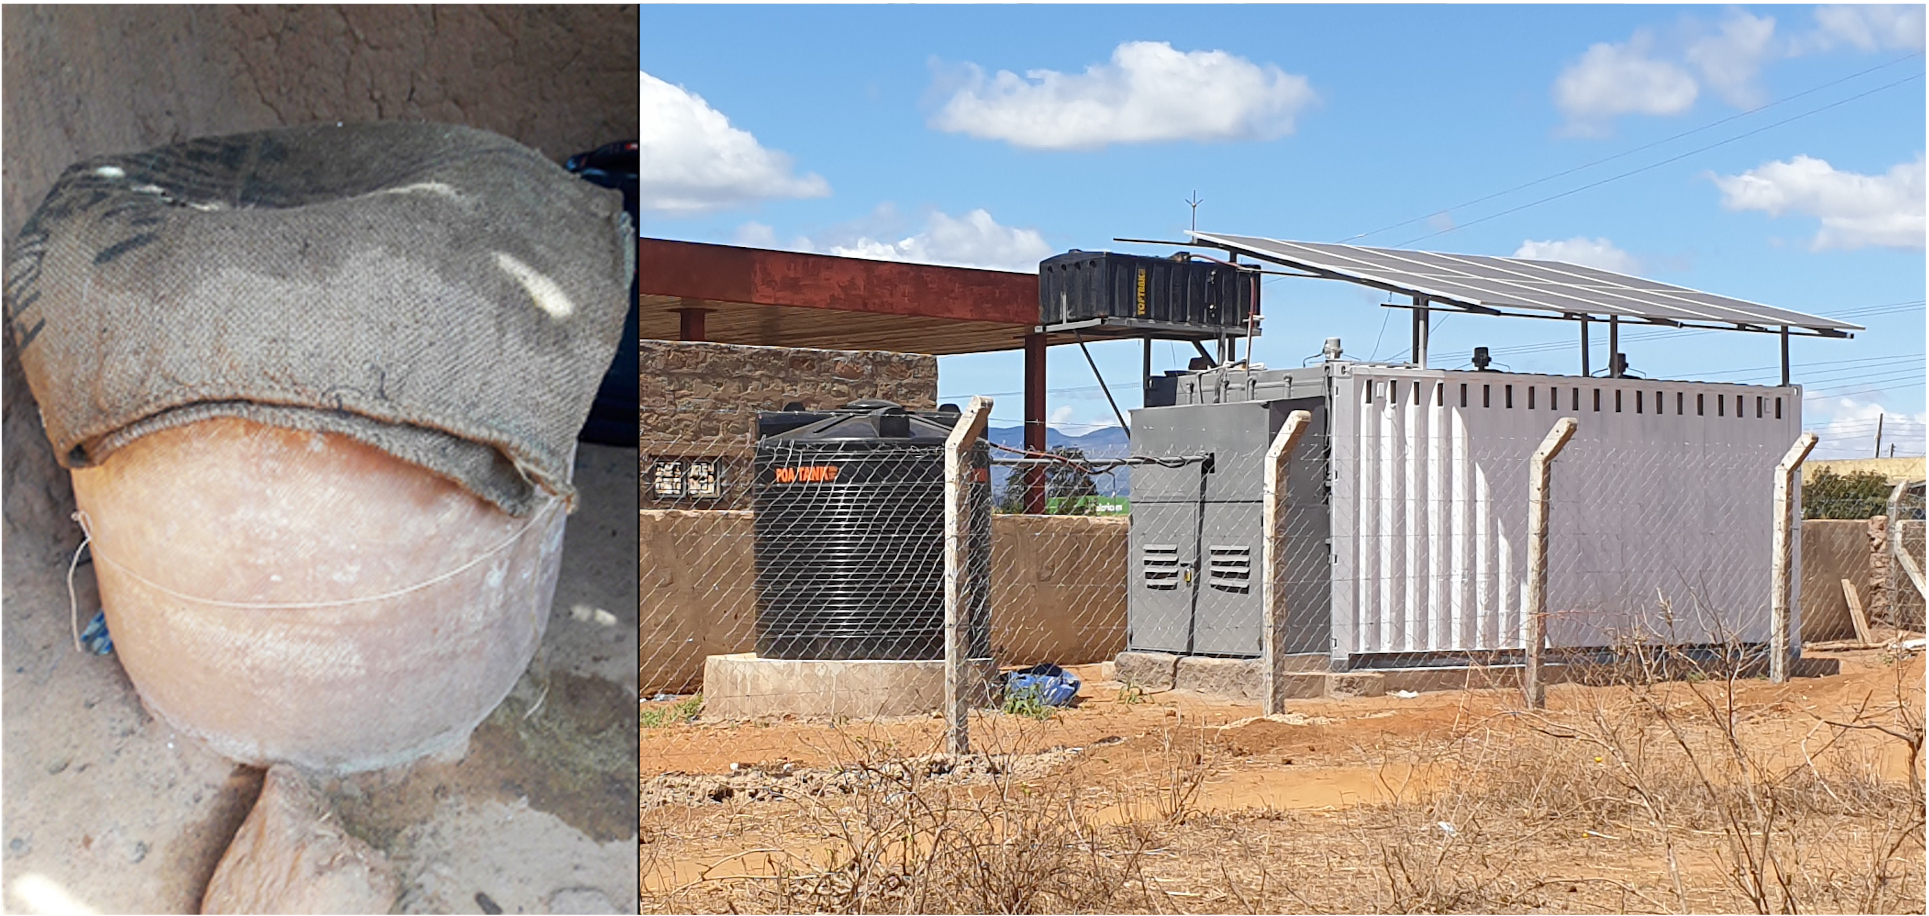 Two examples of an evaporative cooling device for vegetable storage and preservation. Left: clay pot cooler. Right a forced-air evaporative cooling chamber.